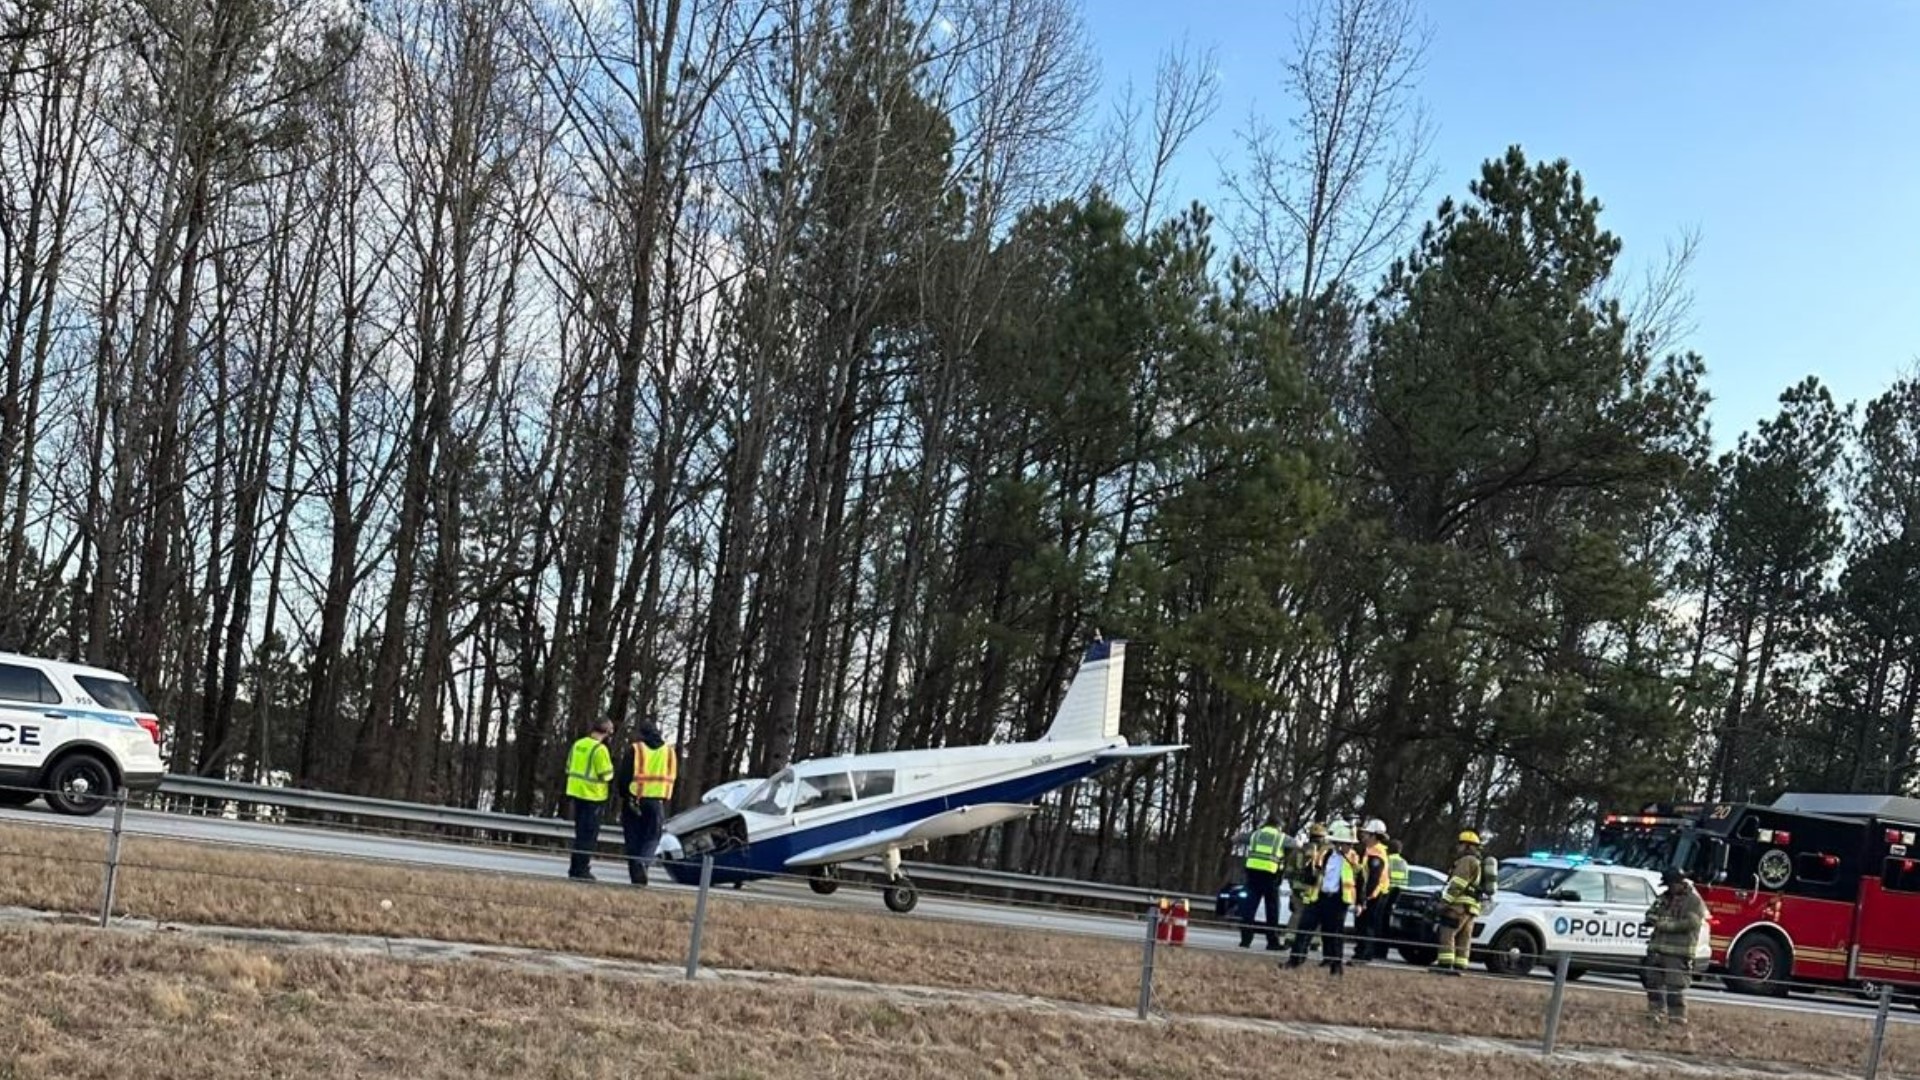 Crews started to tow the plane down I-985 north toward Buford.